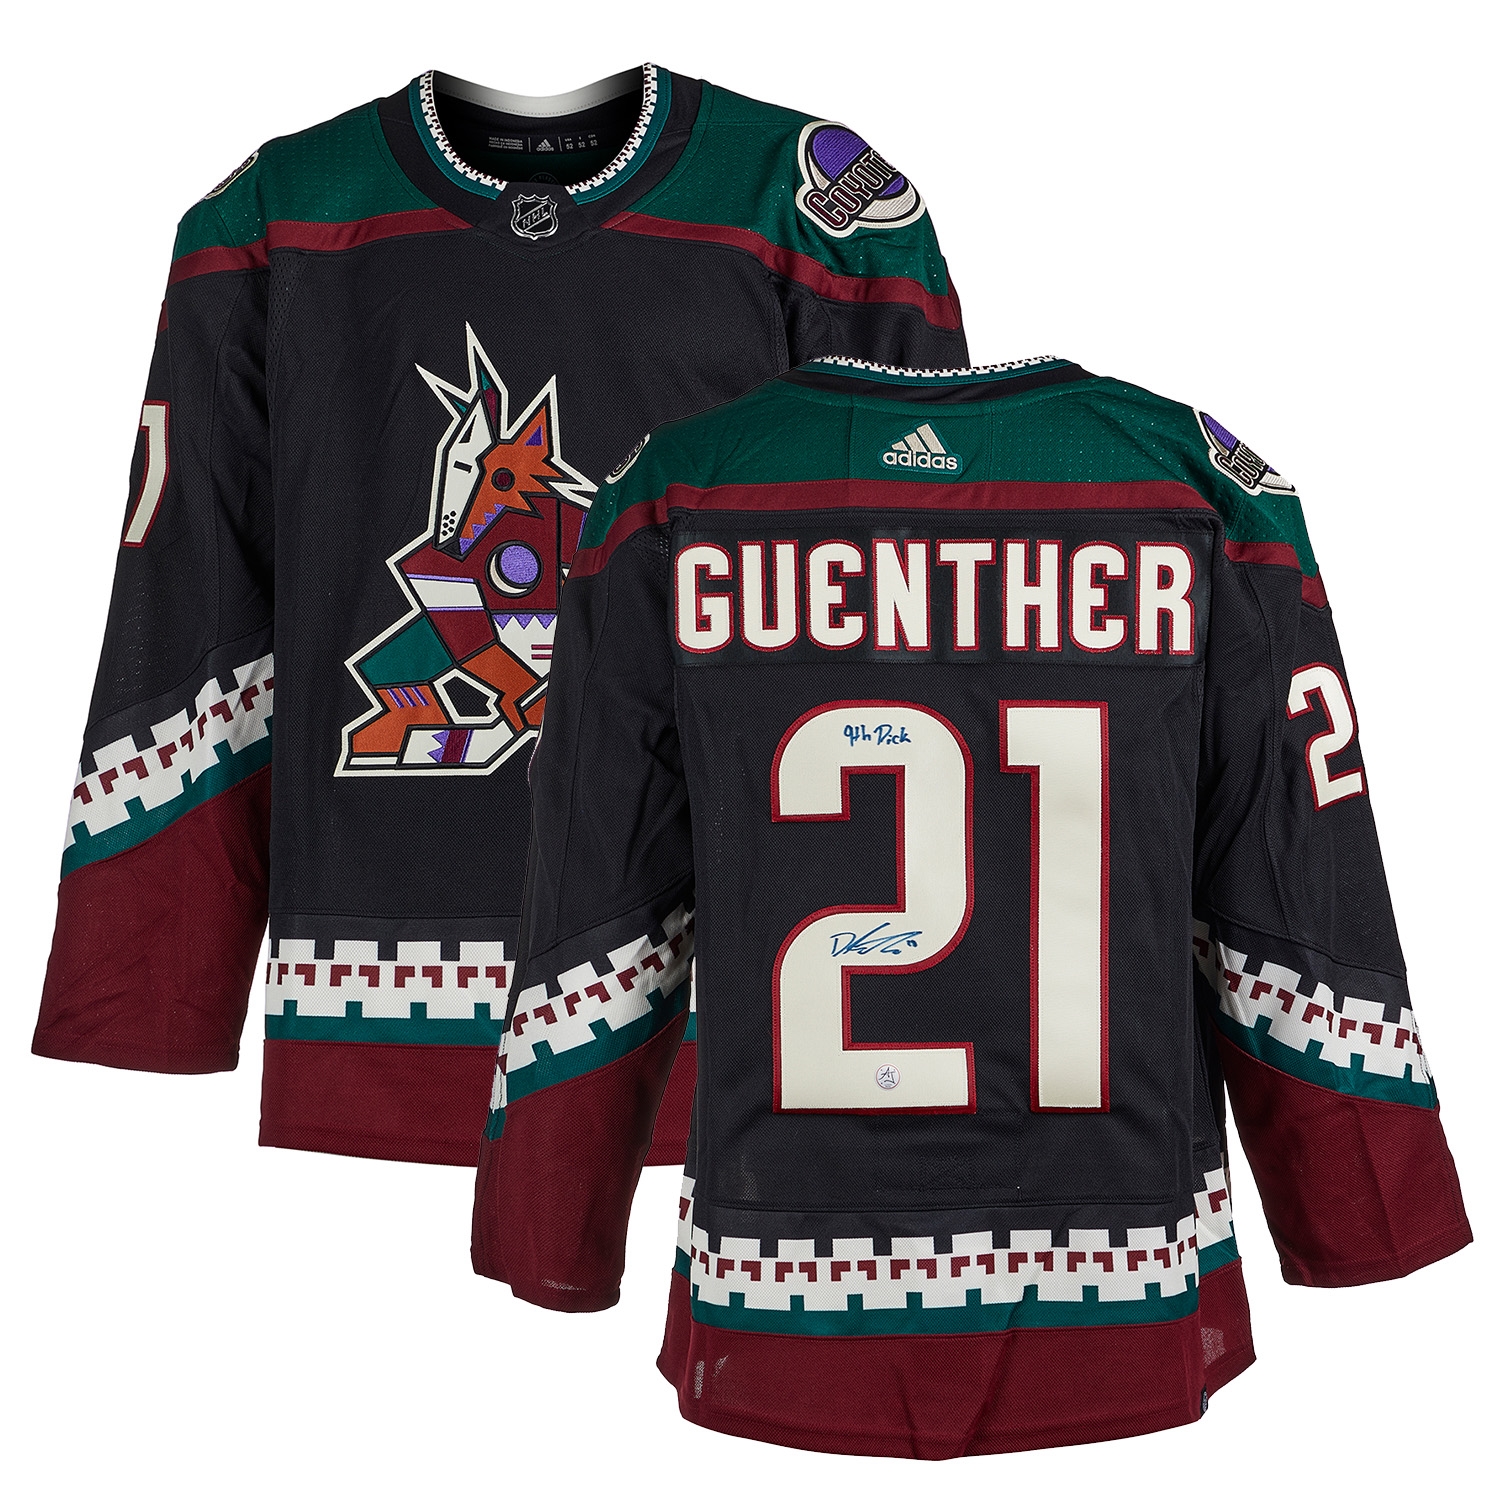 Dylan Guenther Signed & Inscribed Arizona Coyotes Draft Day Adidas Jersey